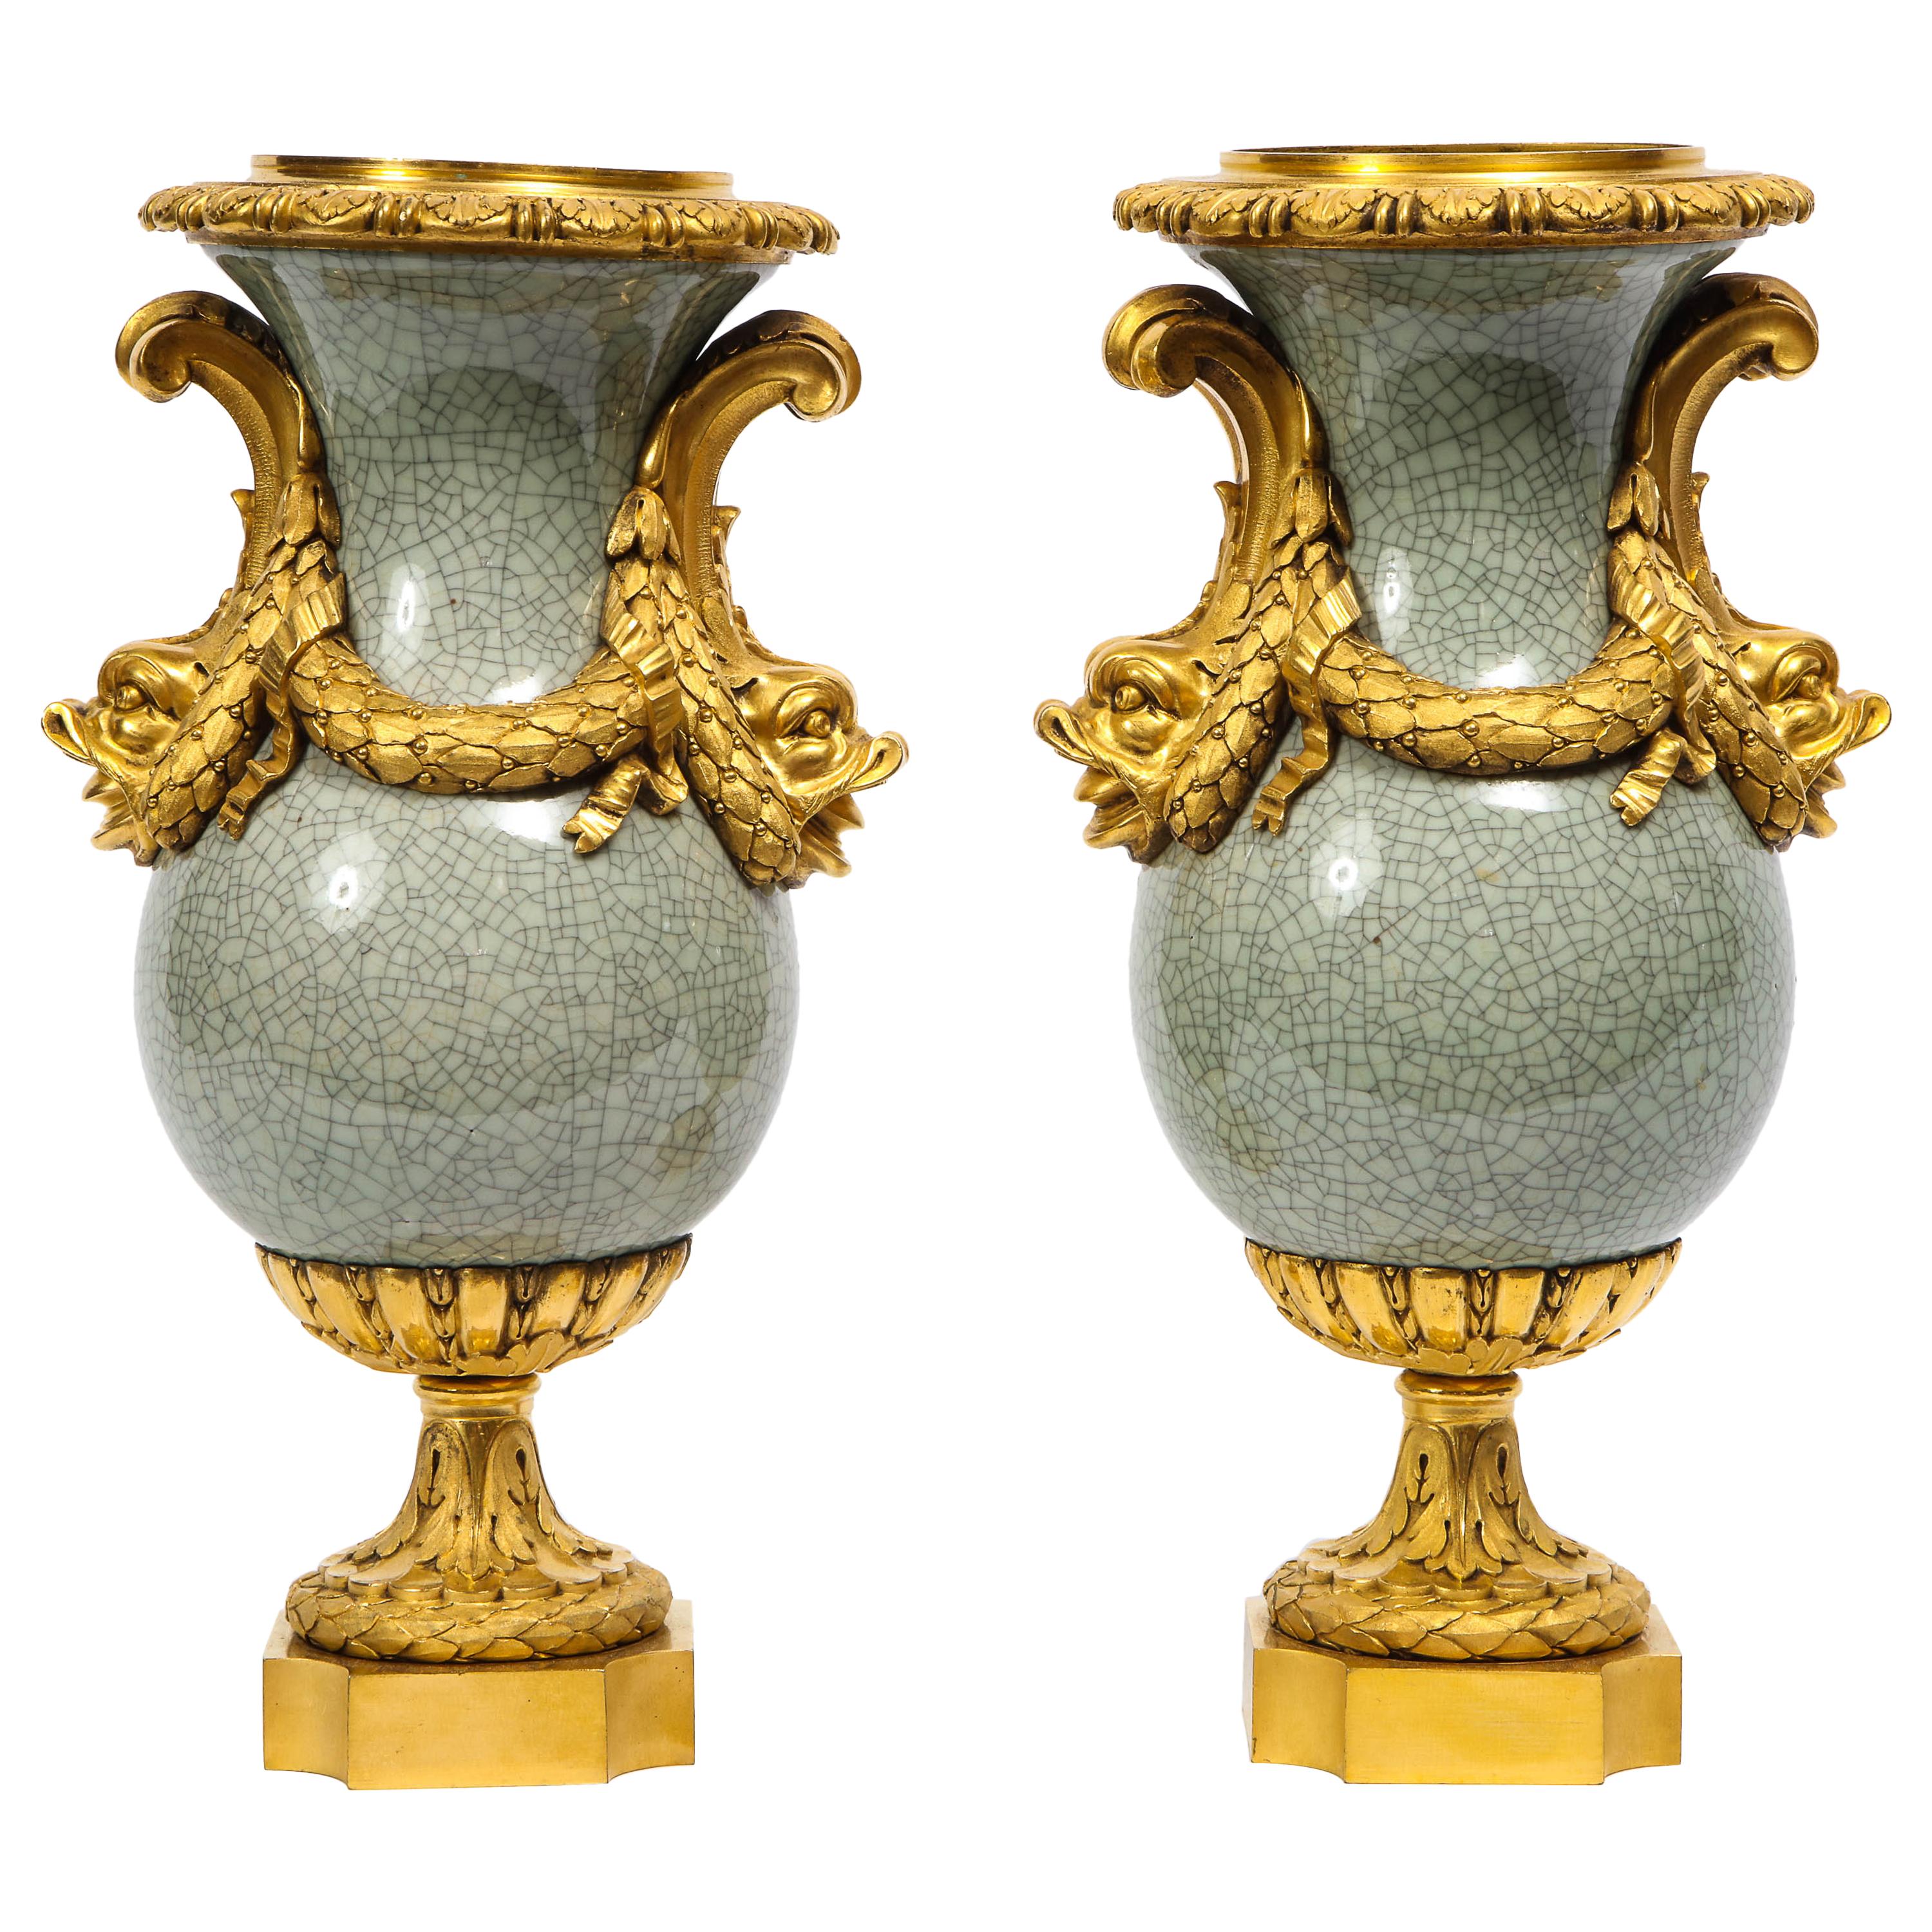 Louis XVI Ormolu-Mounted Chinese Celadon Crackle Vases with Dolphin Handles